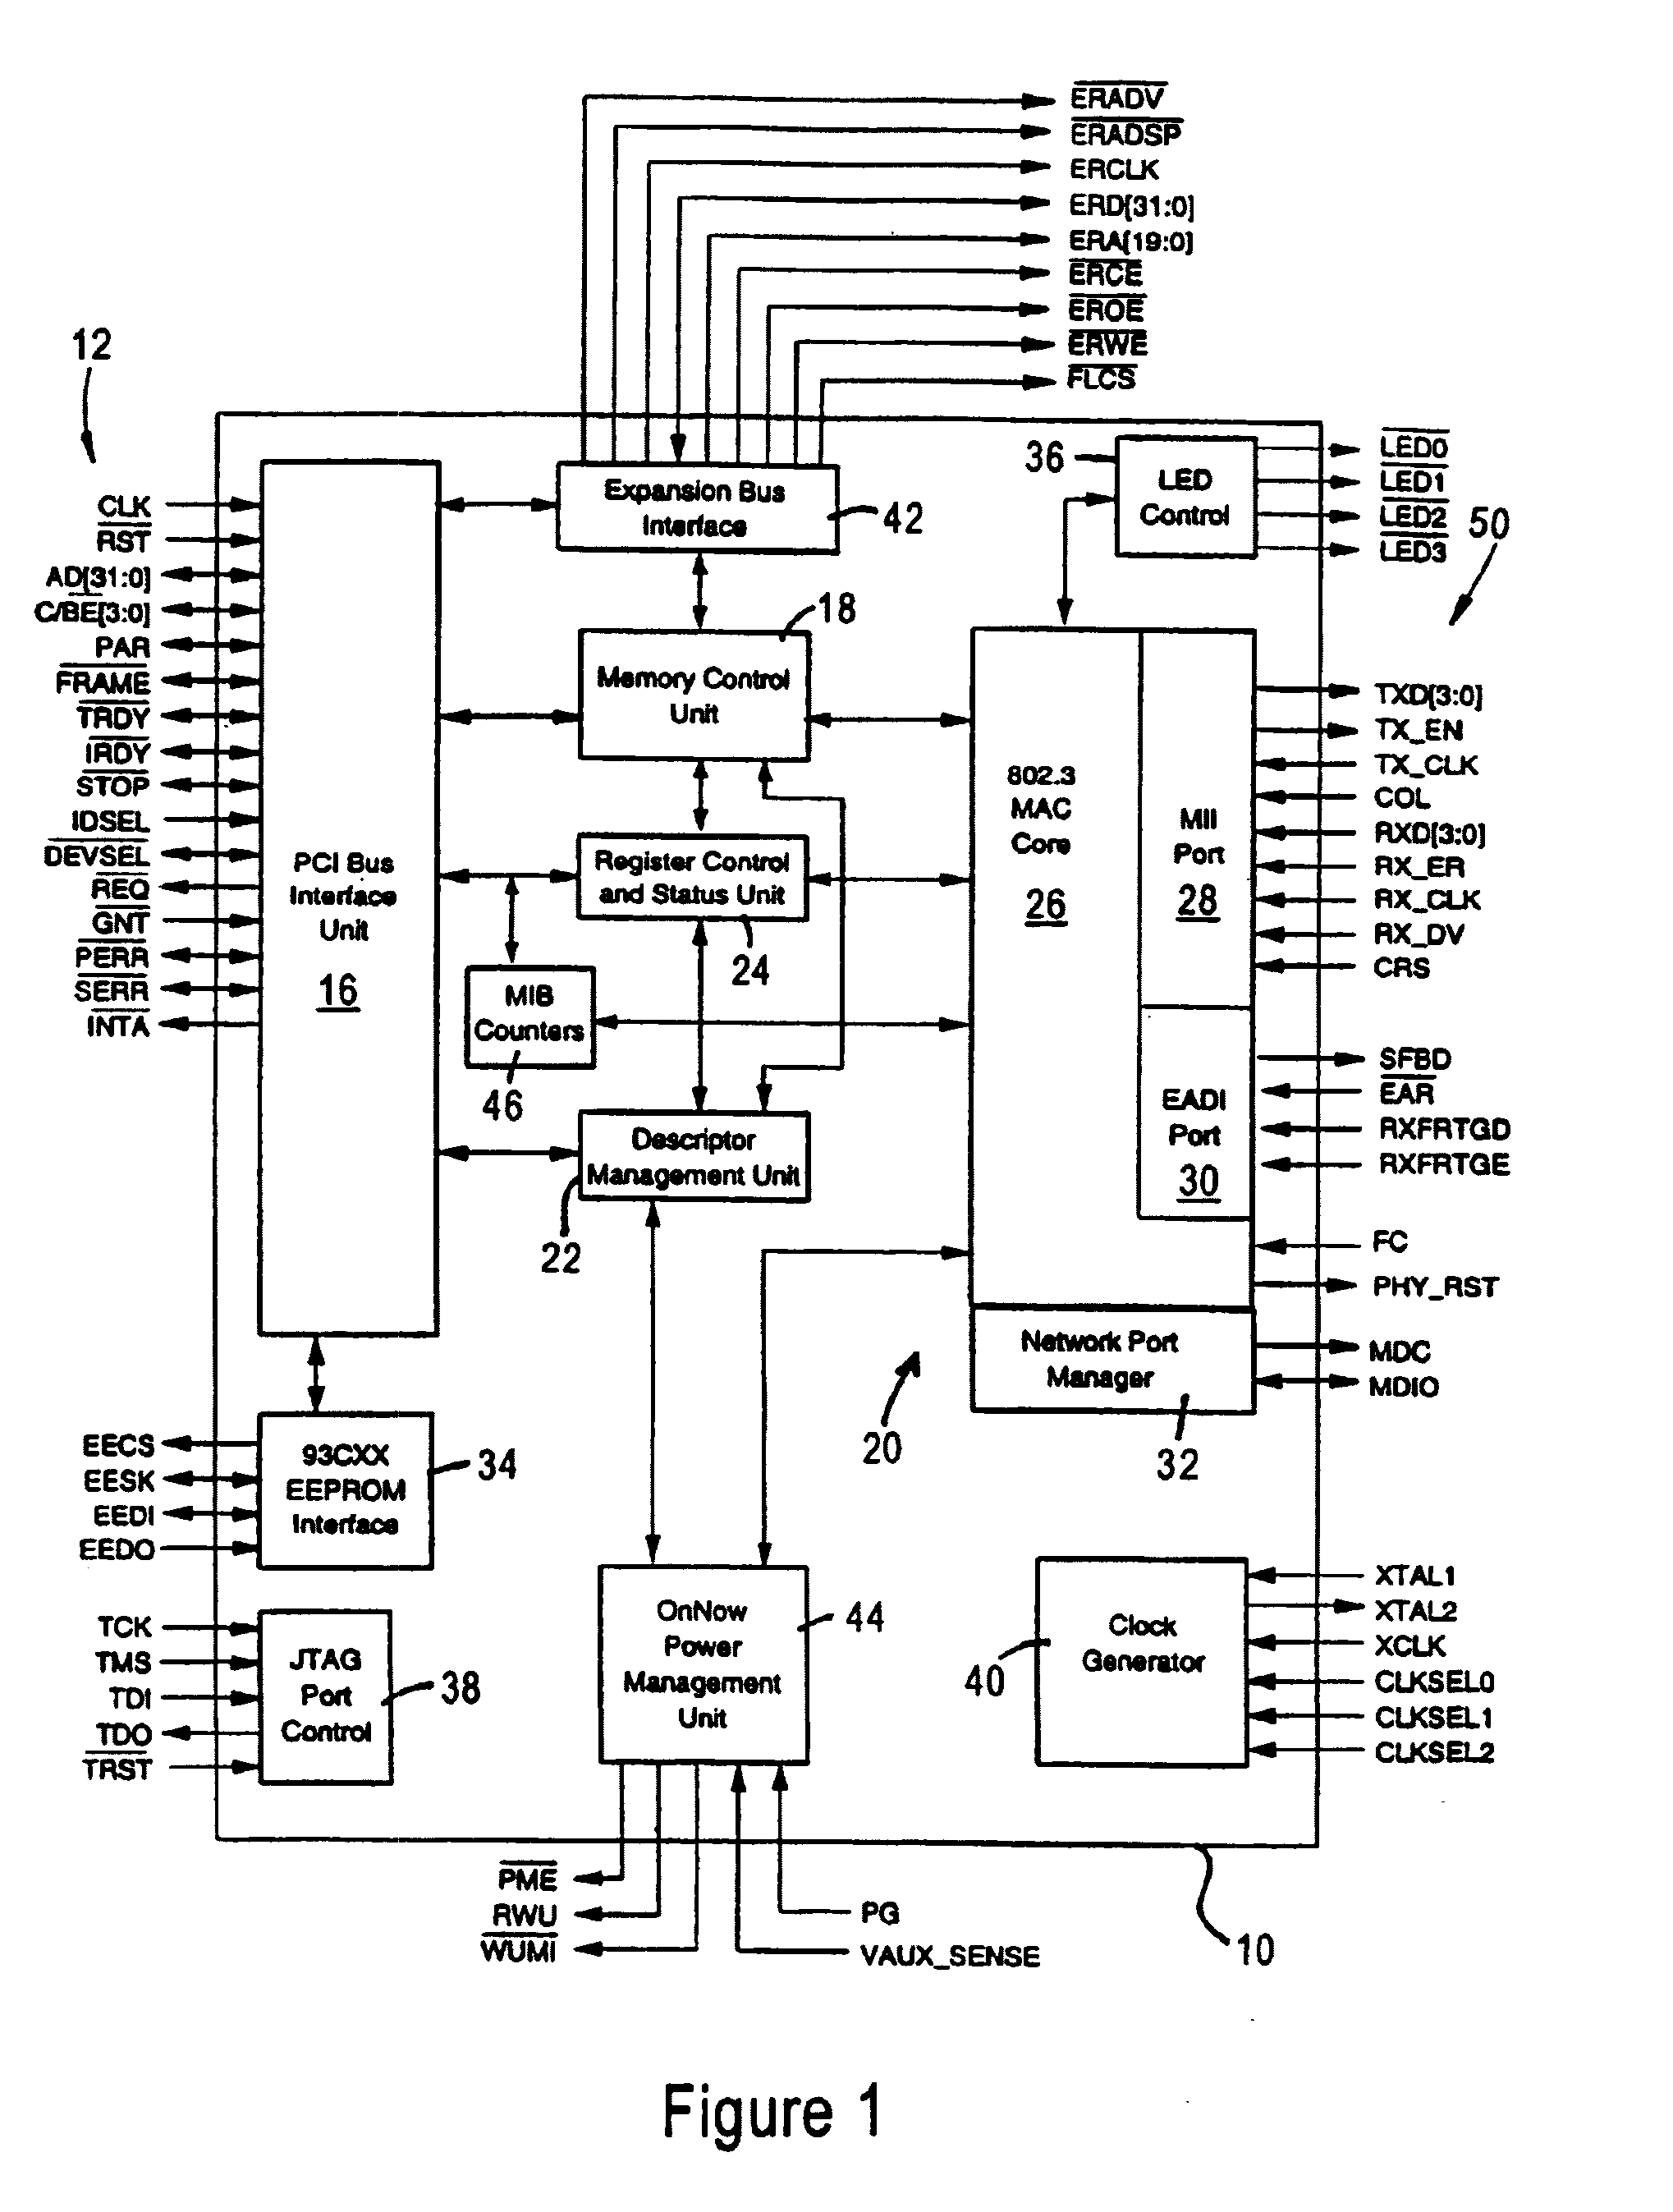 Automatic generation of flow control frames